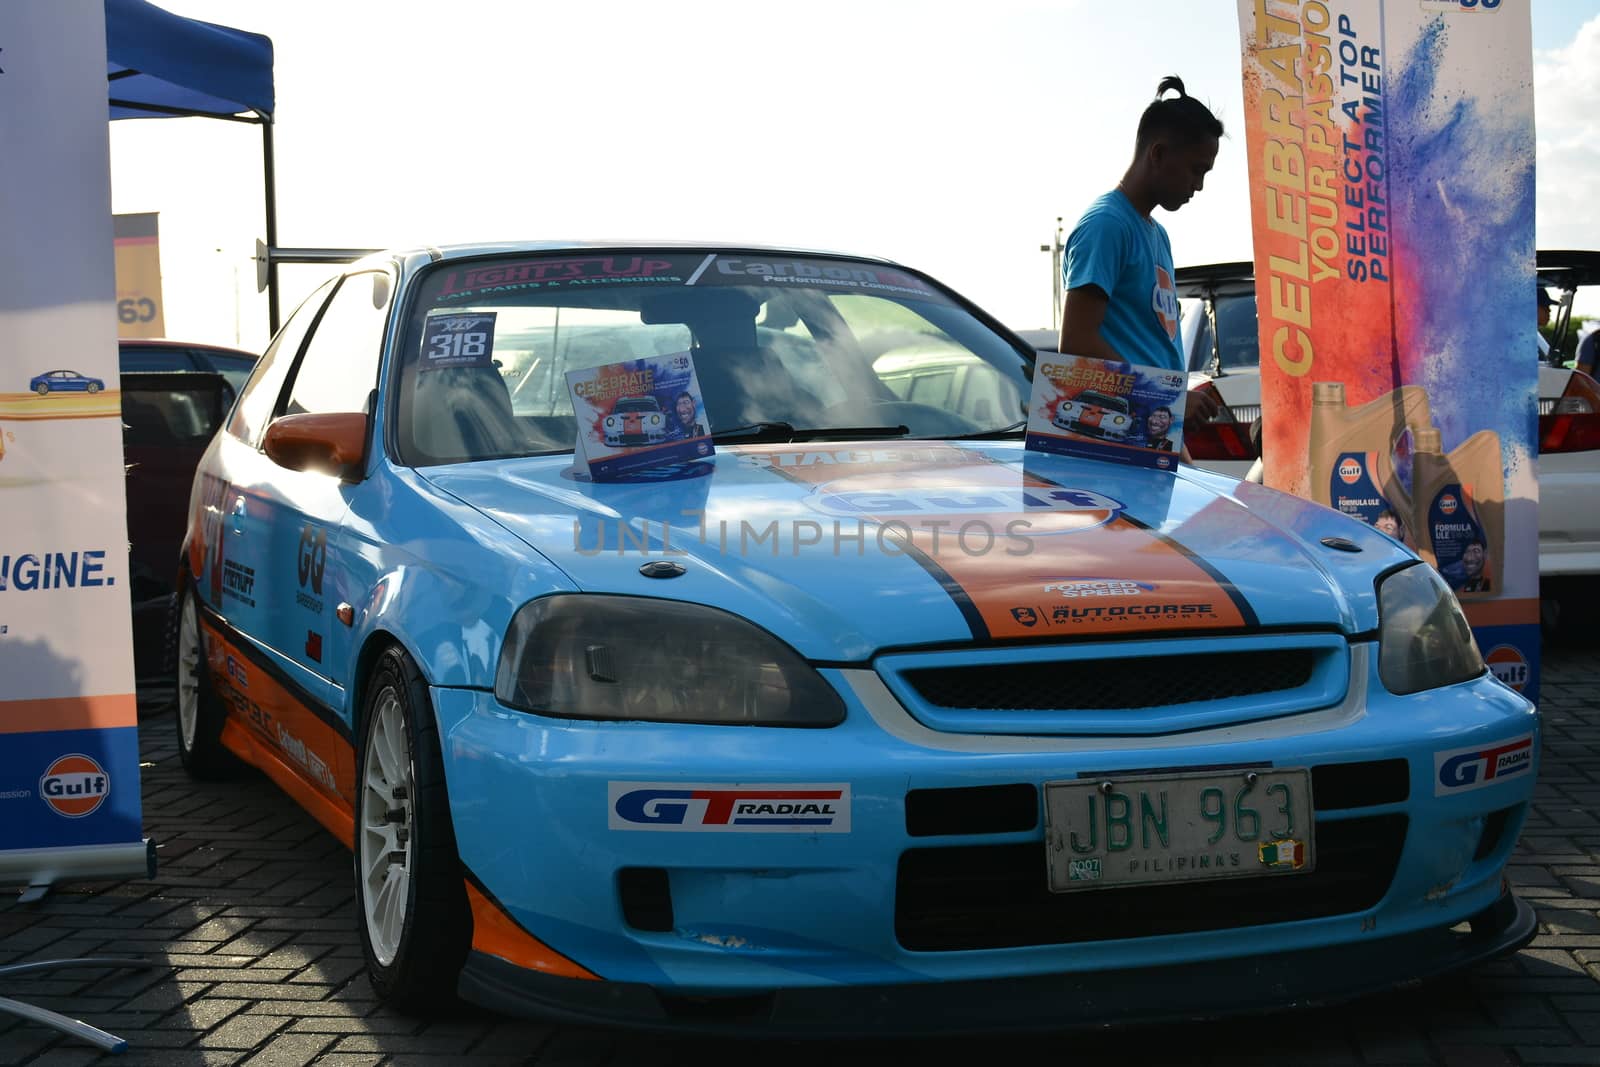 Honda civic at Bumper to Bumper car show in Pasay, Philippines by imwaltersy